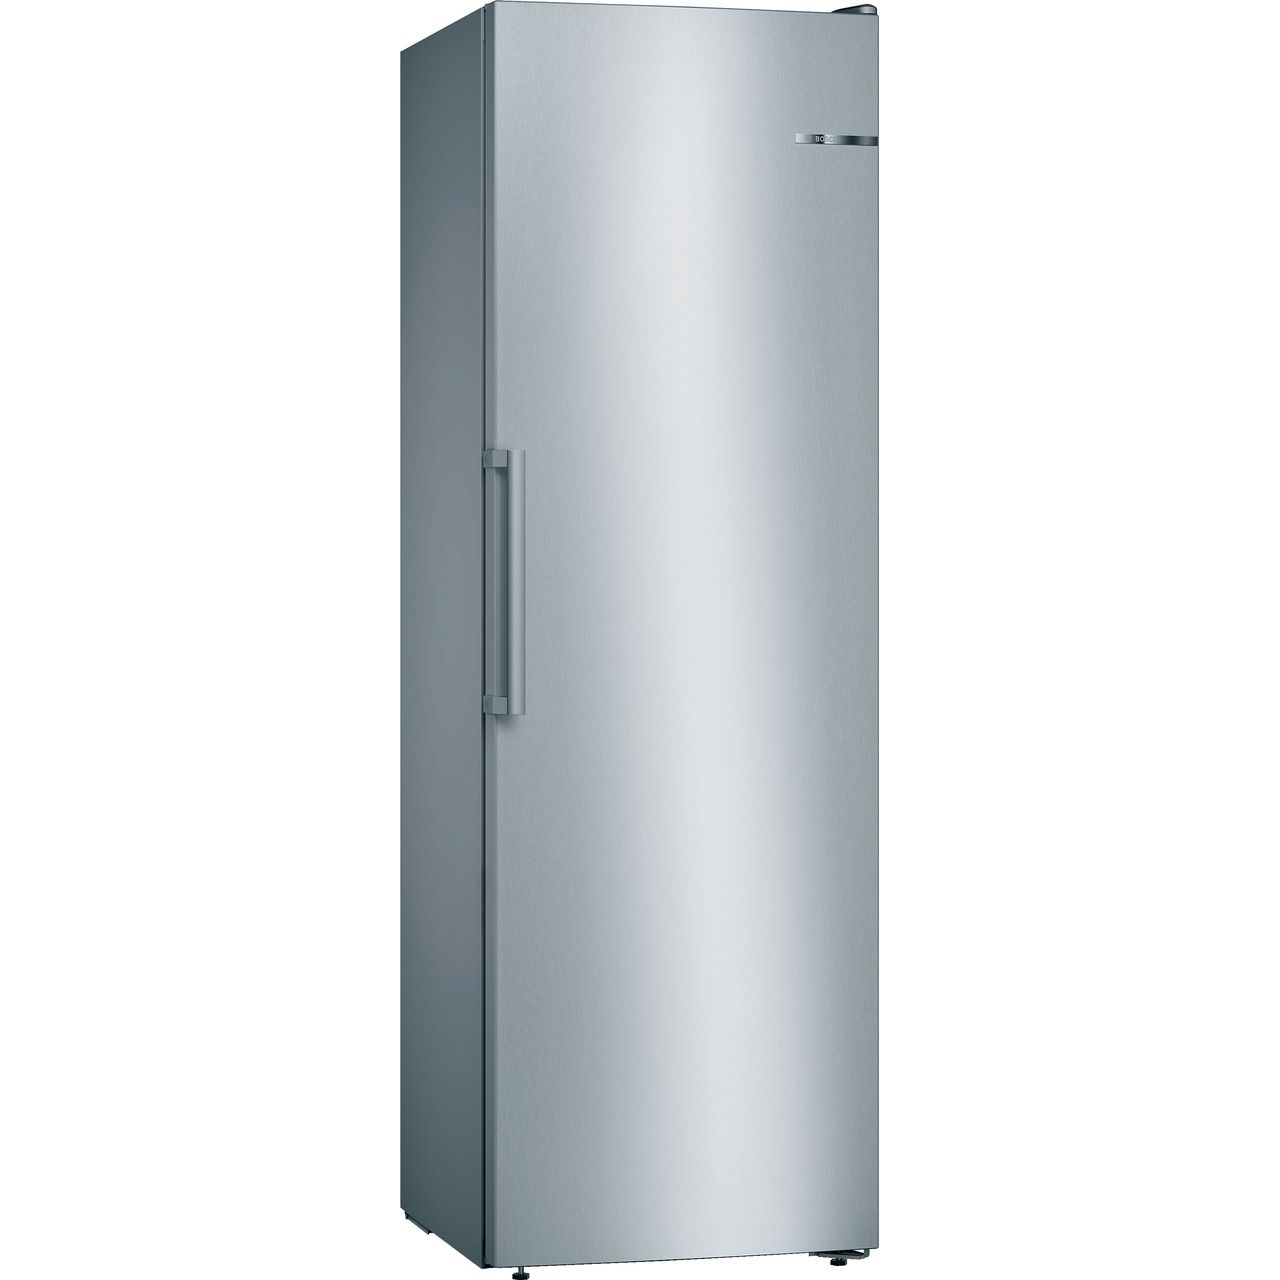 Bosch Serie 4 GSN36VLFP Frost Free Upright Freezer with Fixed Door Fixing Kit Review